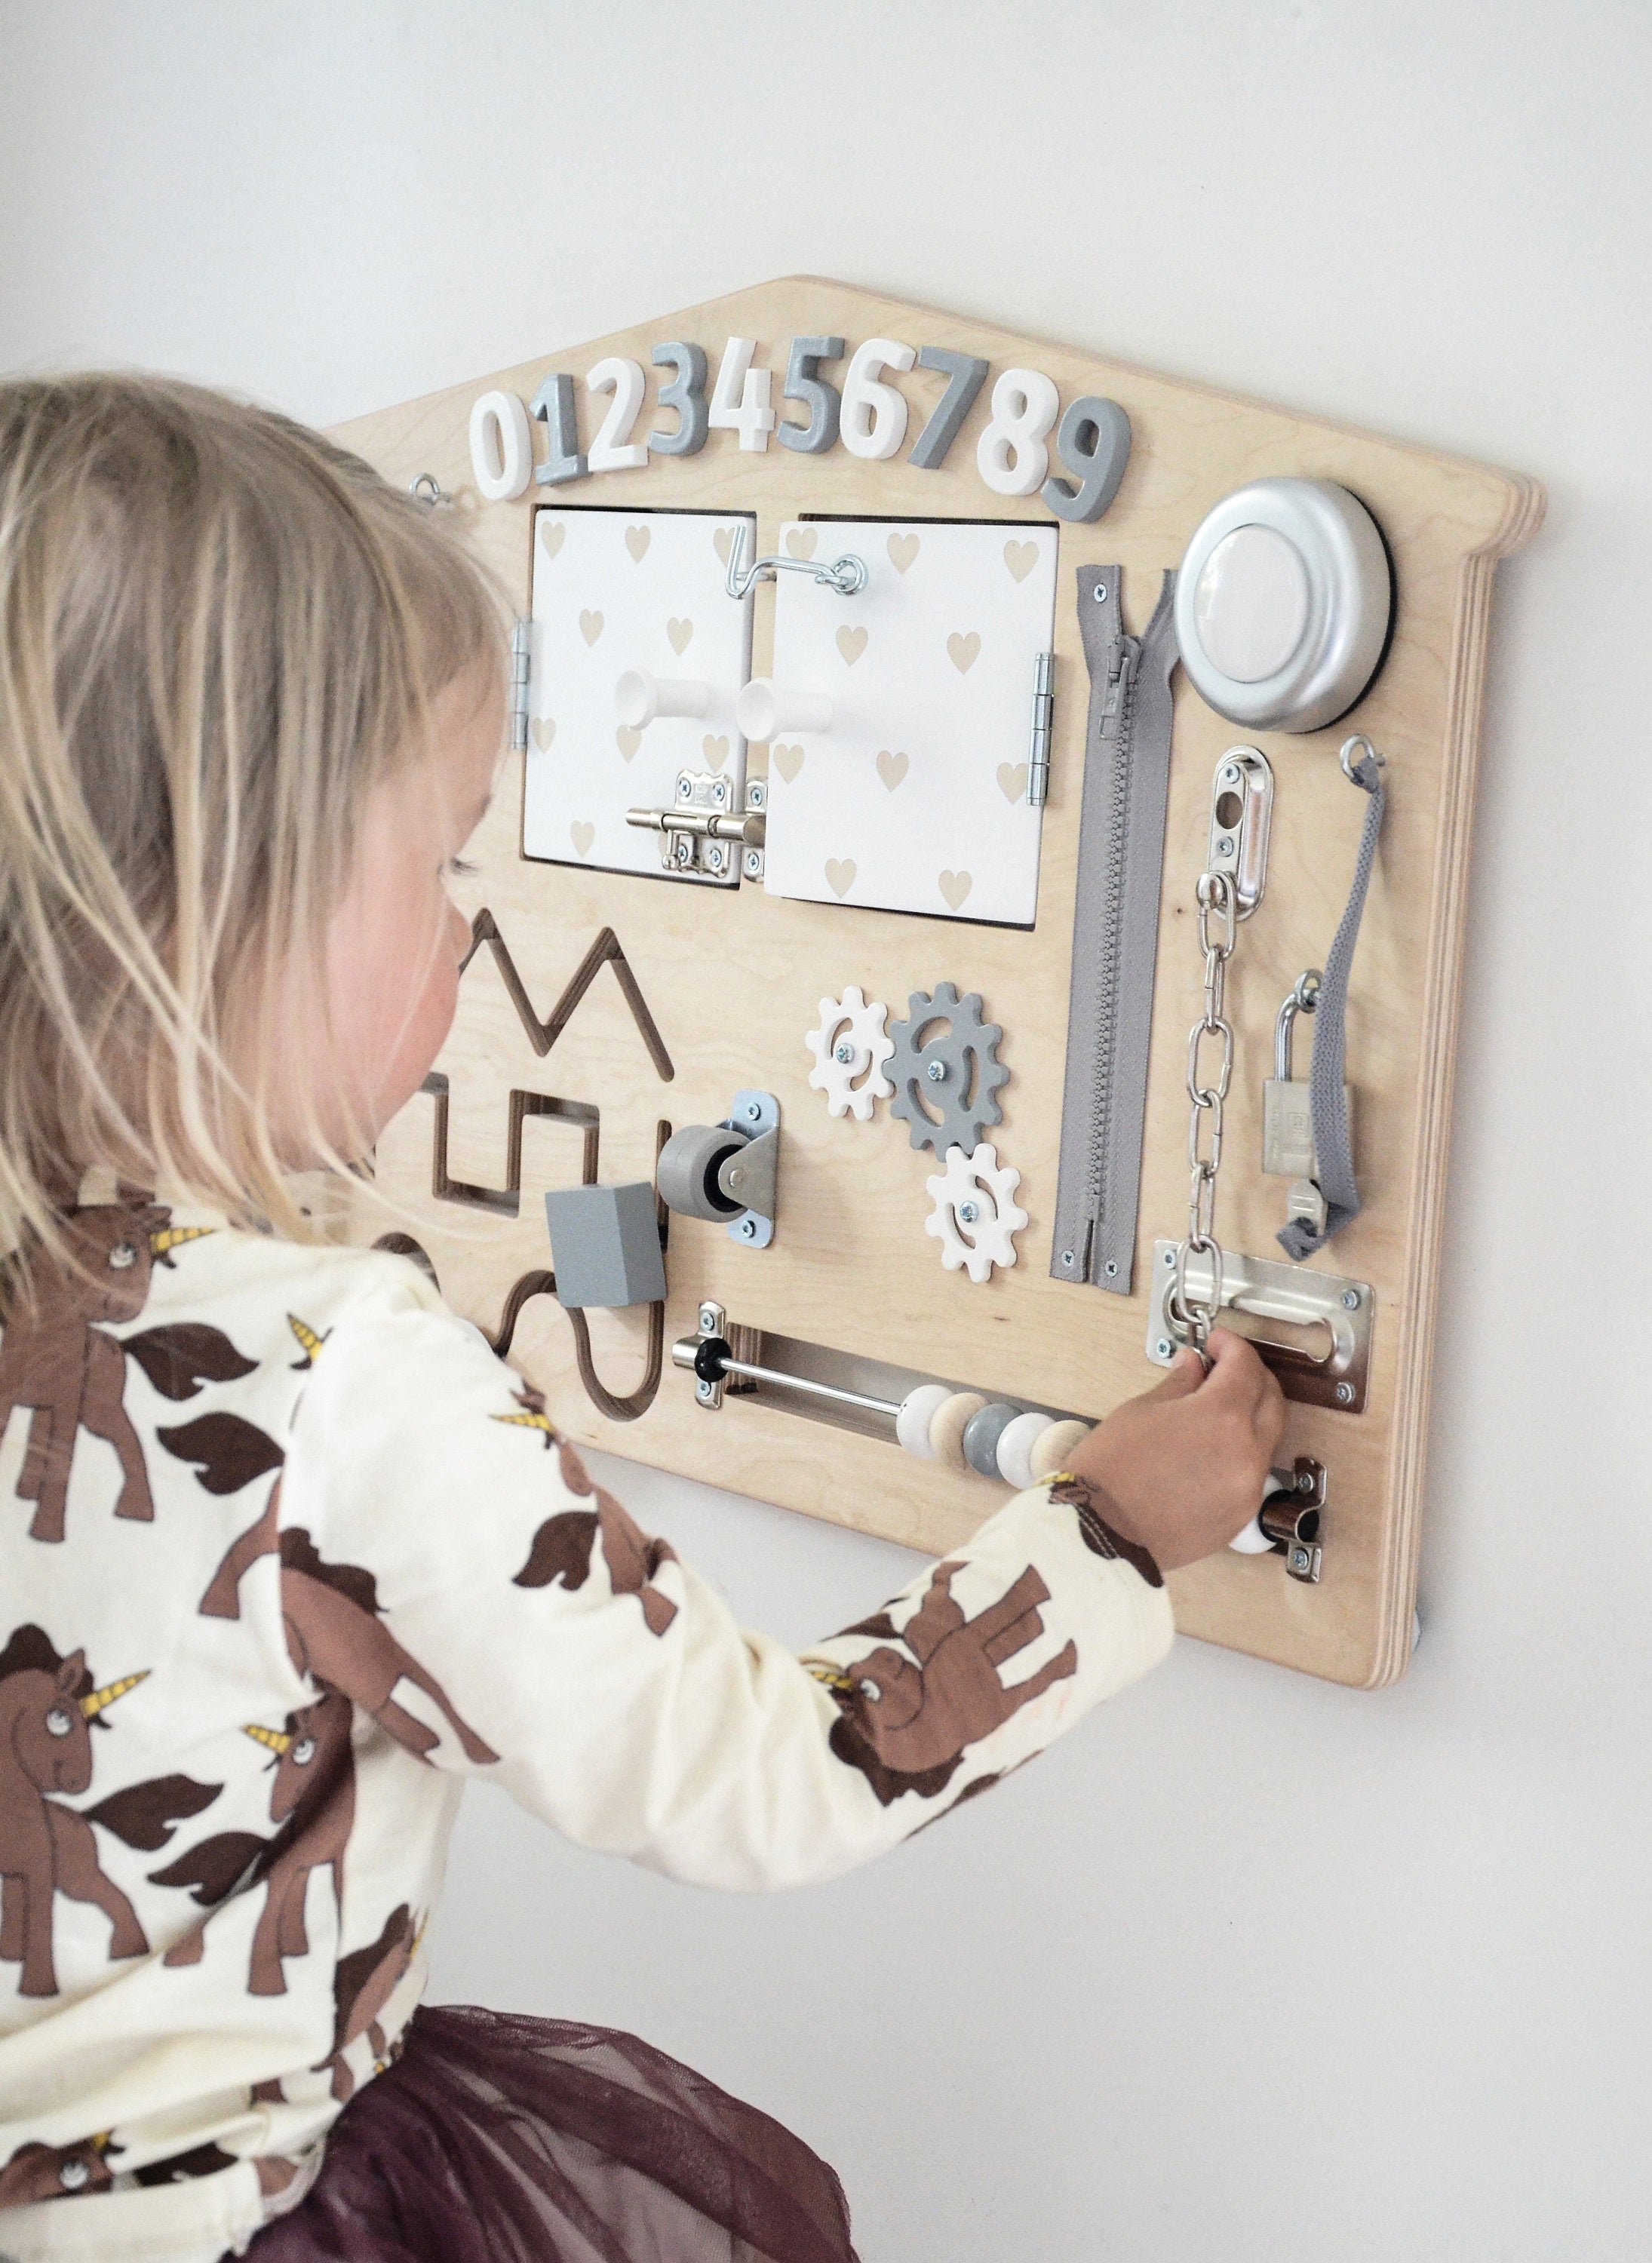 The Top 7 Busy Boards for Toddlers & Babies — The Montessori-Minded Mom